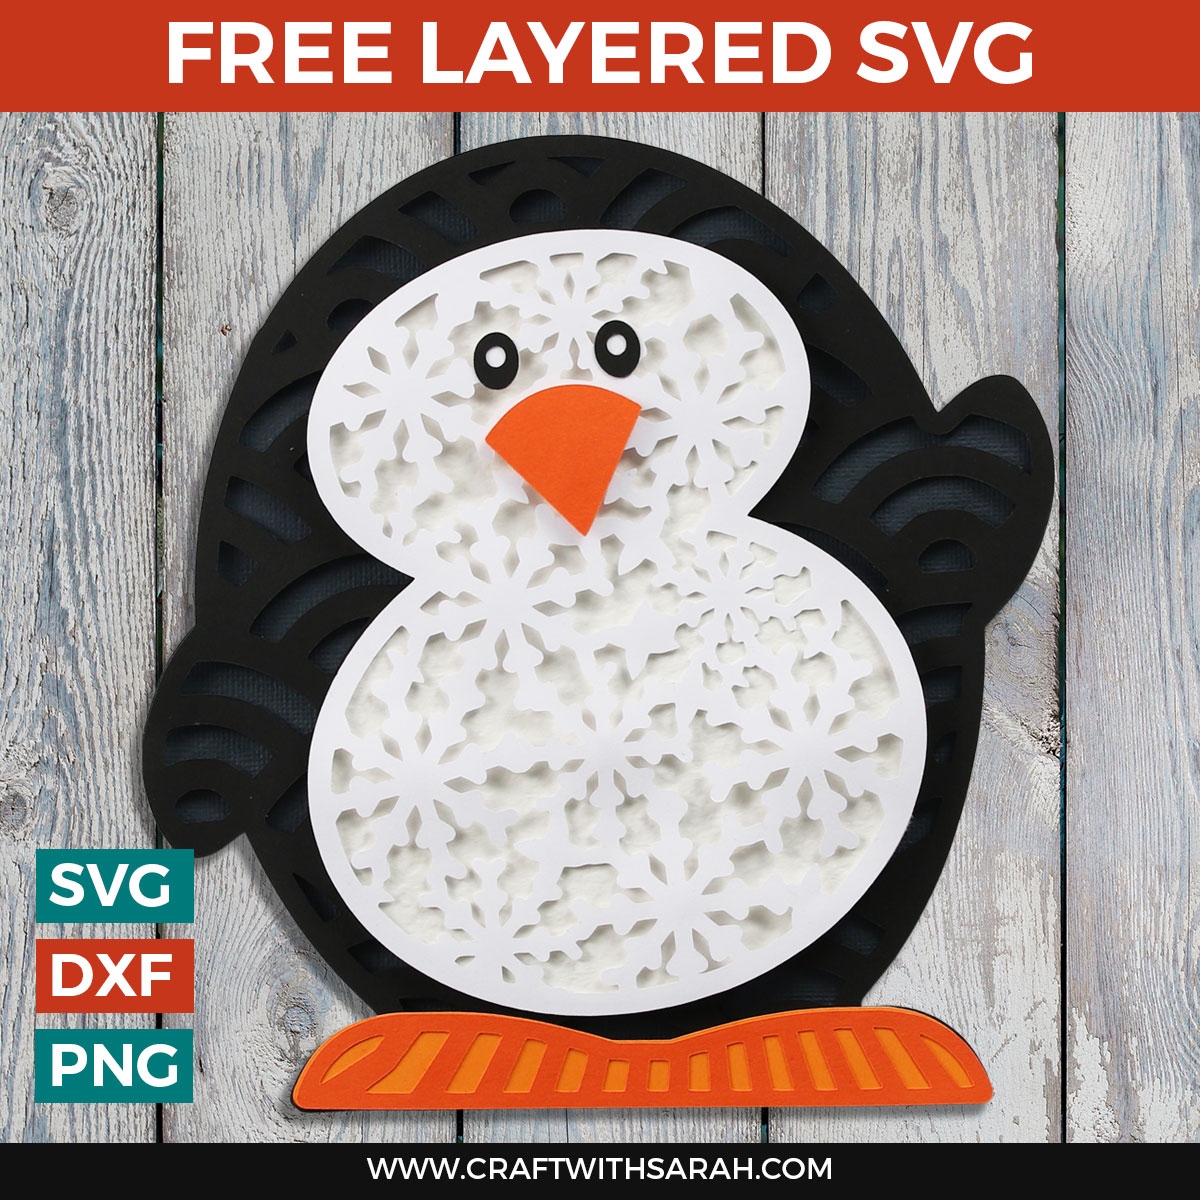 Free Layered Christmas SVGs: 3D Papercraft Projects for Christmas